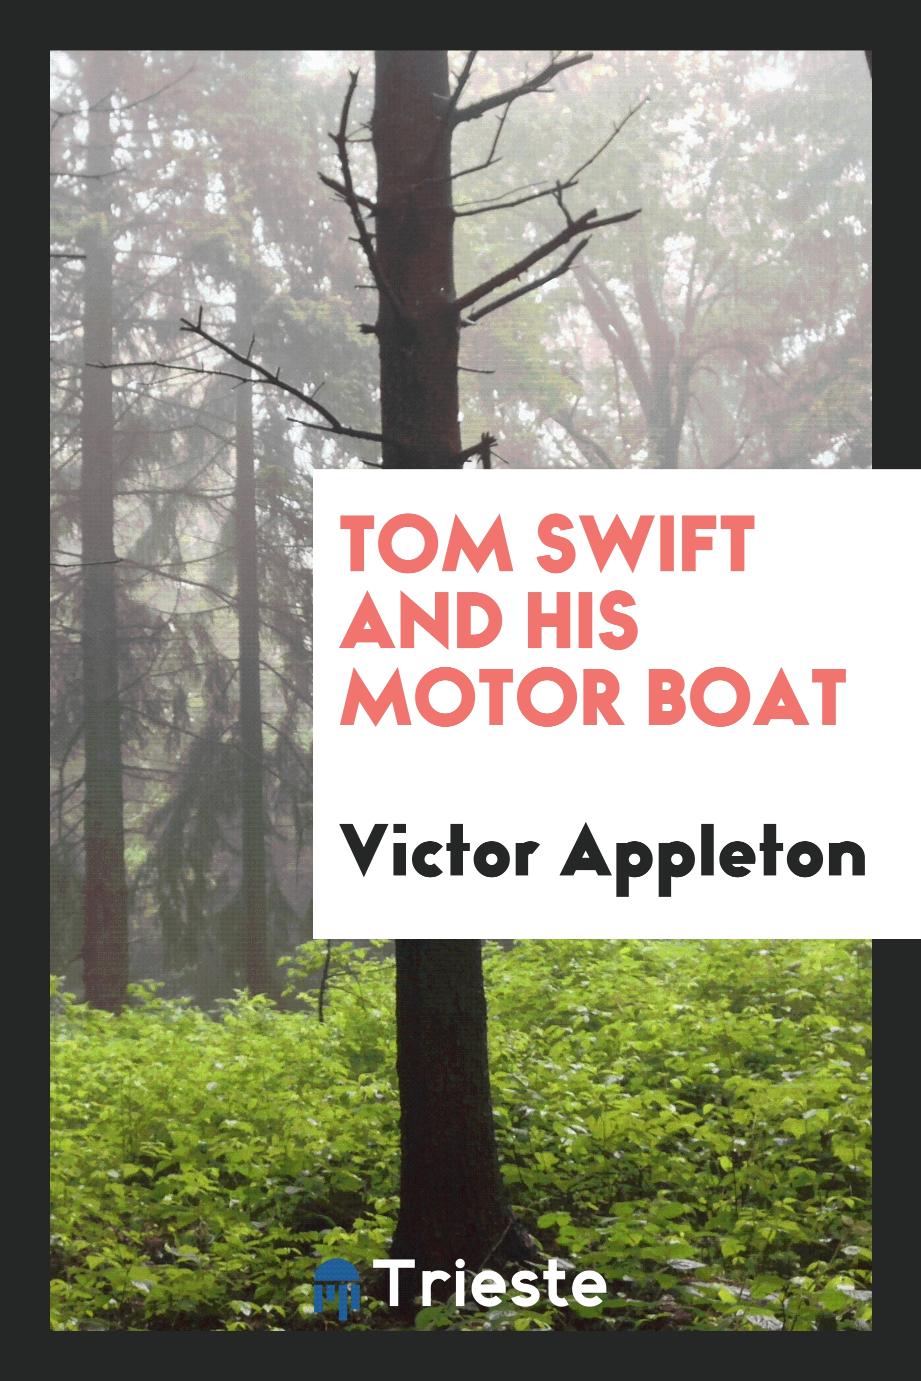 Tom Swift and his motor boat